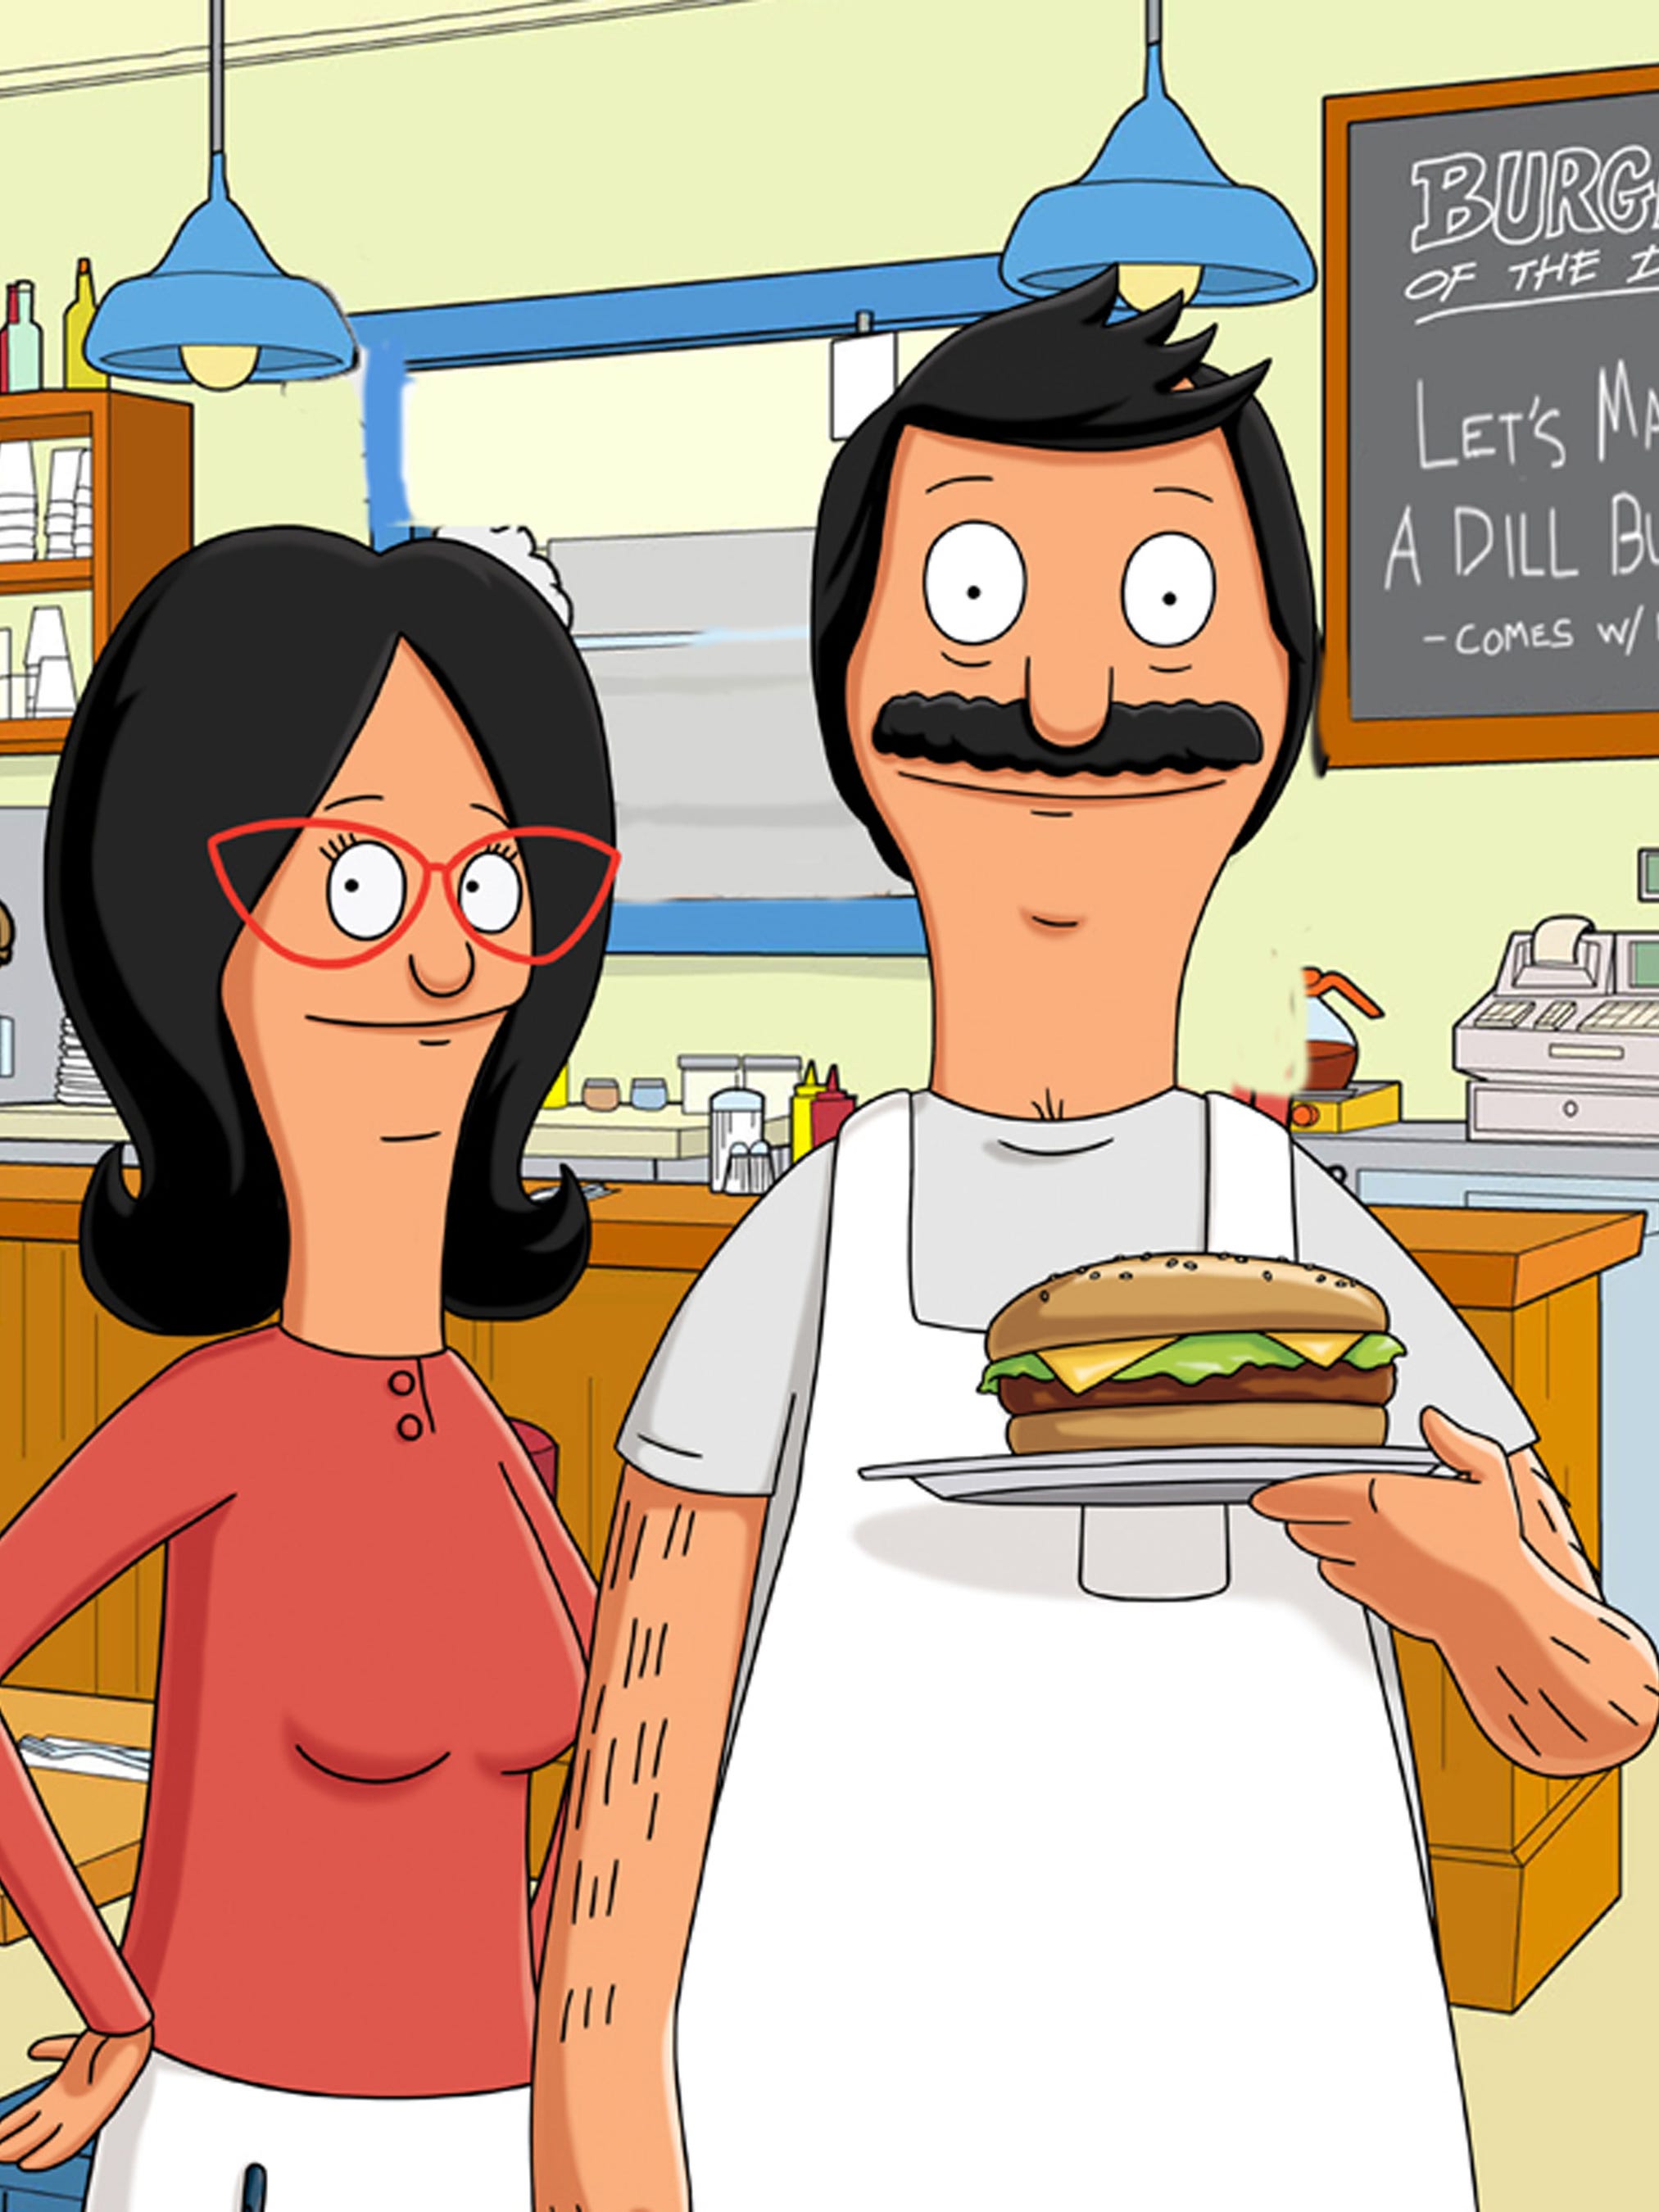 Bob's Burgers' cast coming to University of Iowa for stand-up comedy show